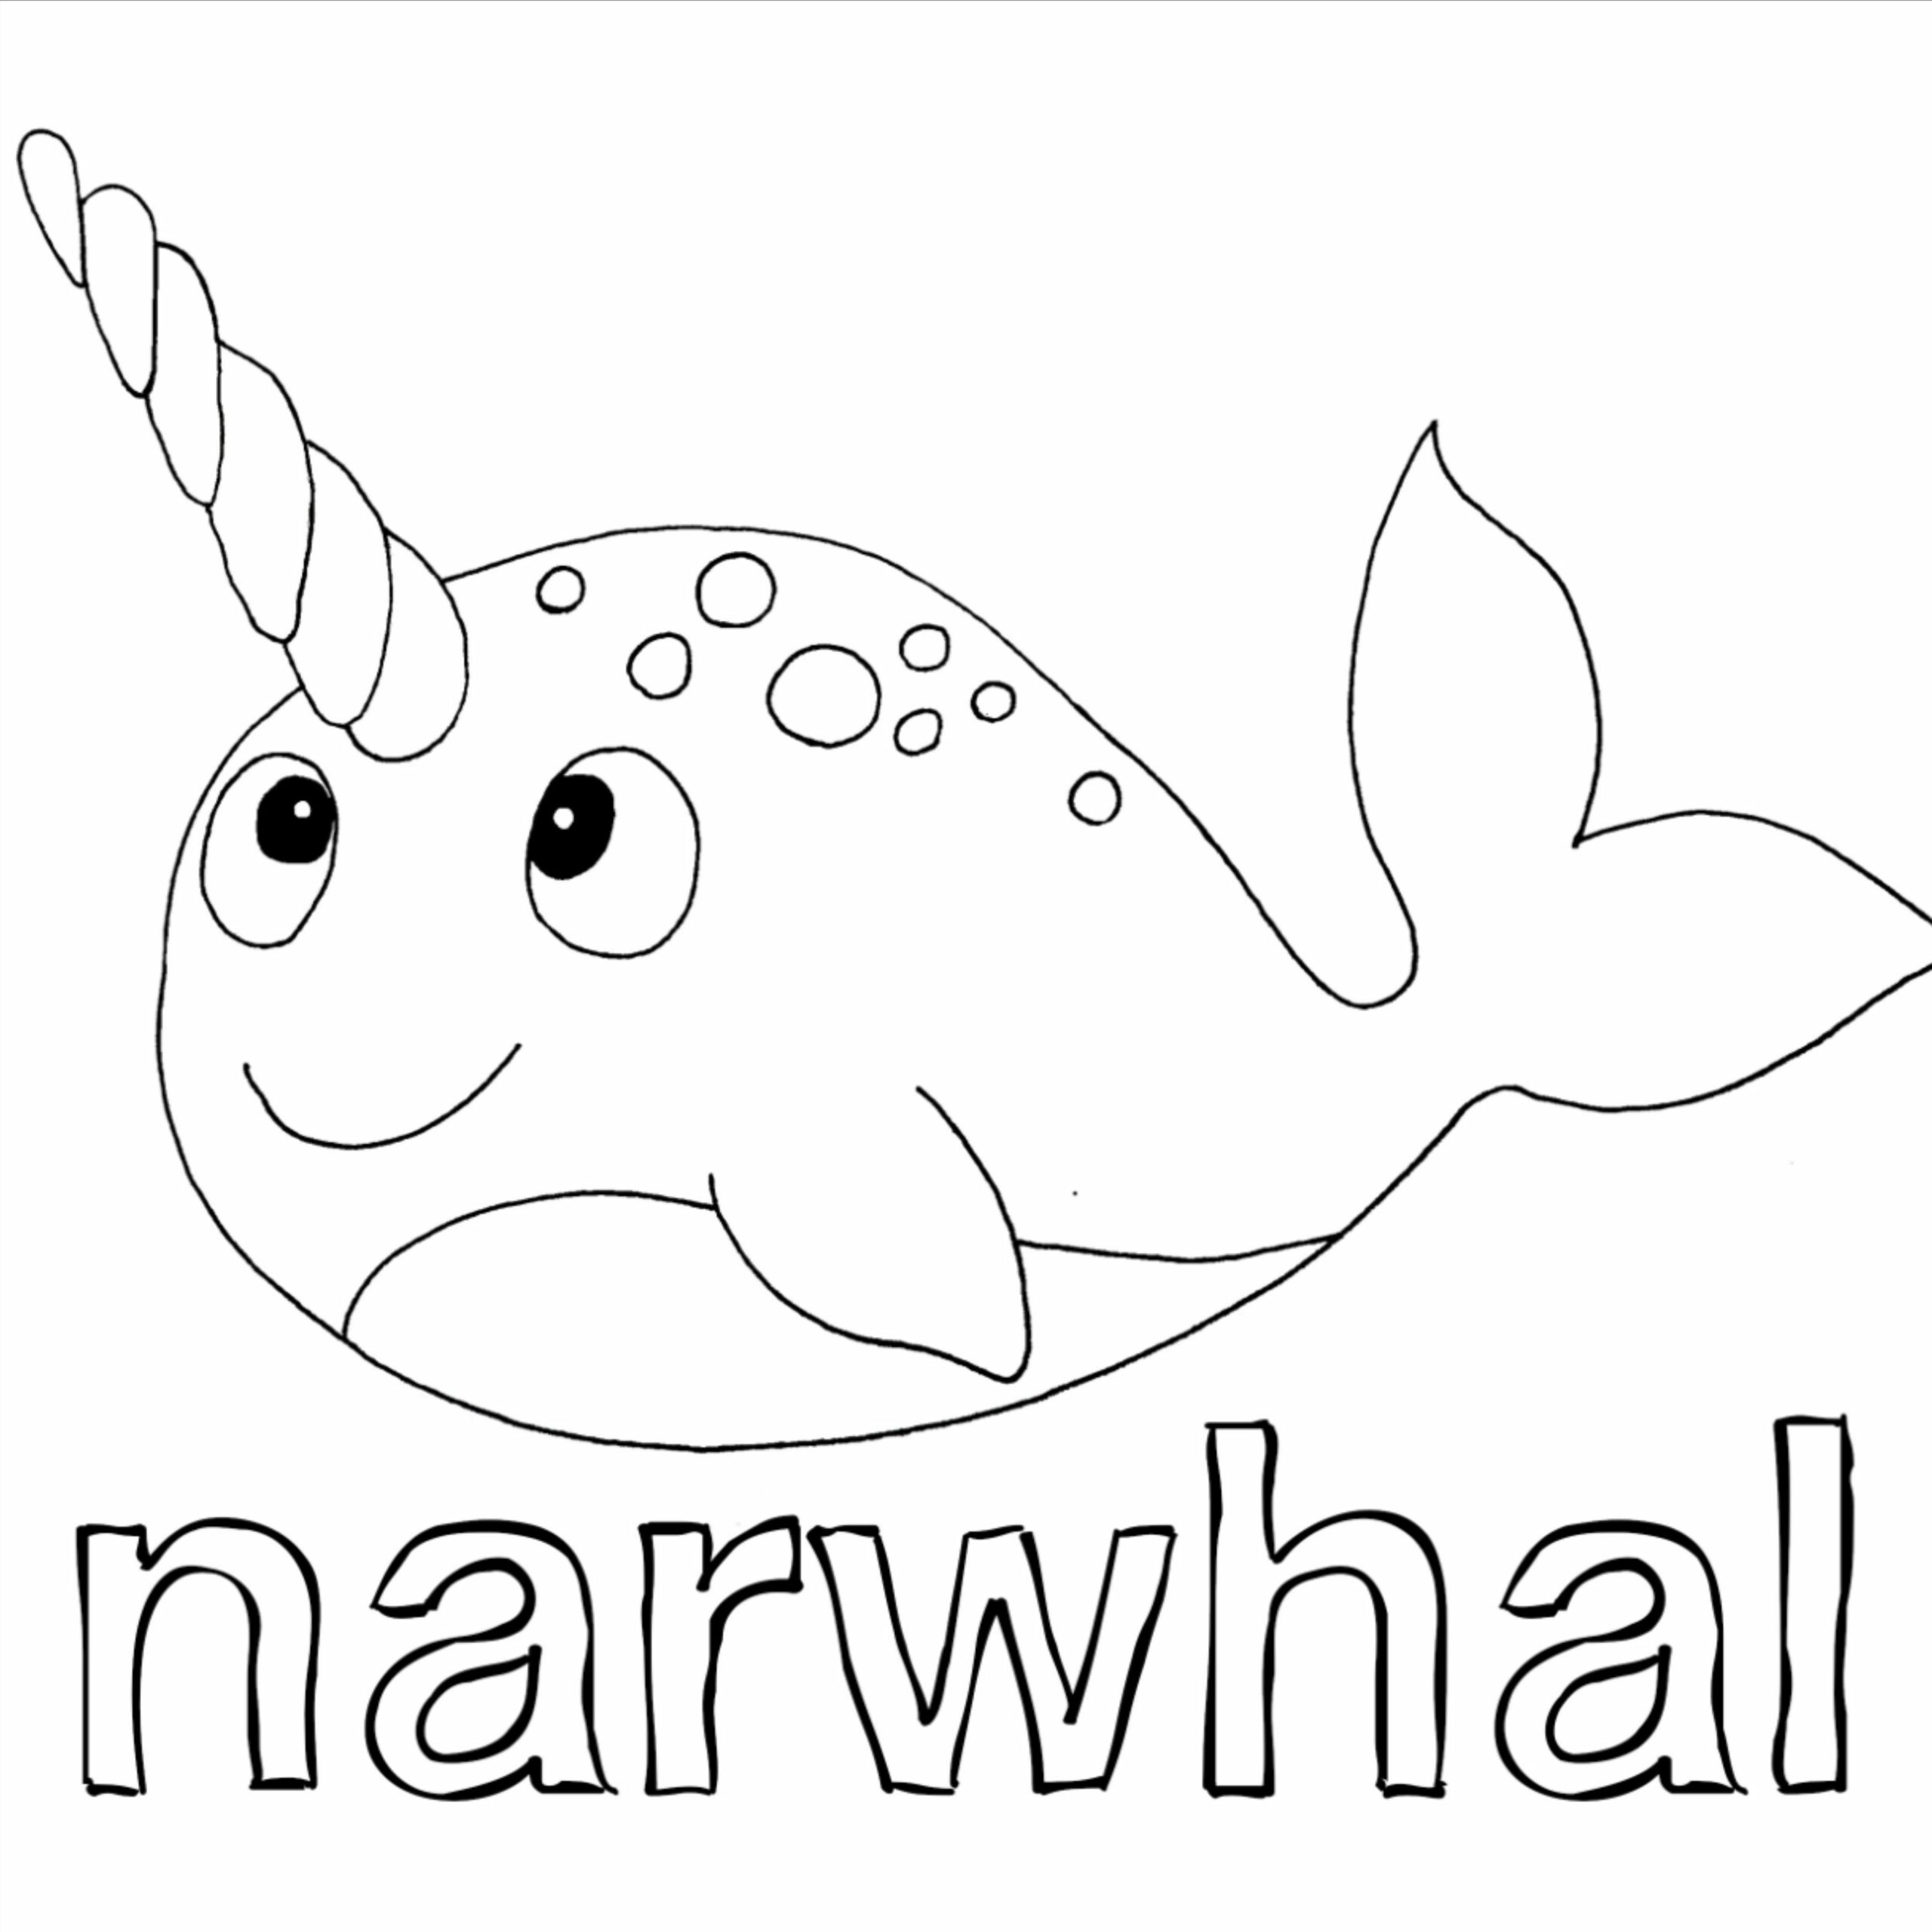 kawaii narwhal coloring pages